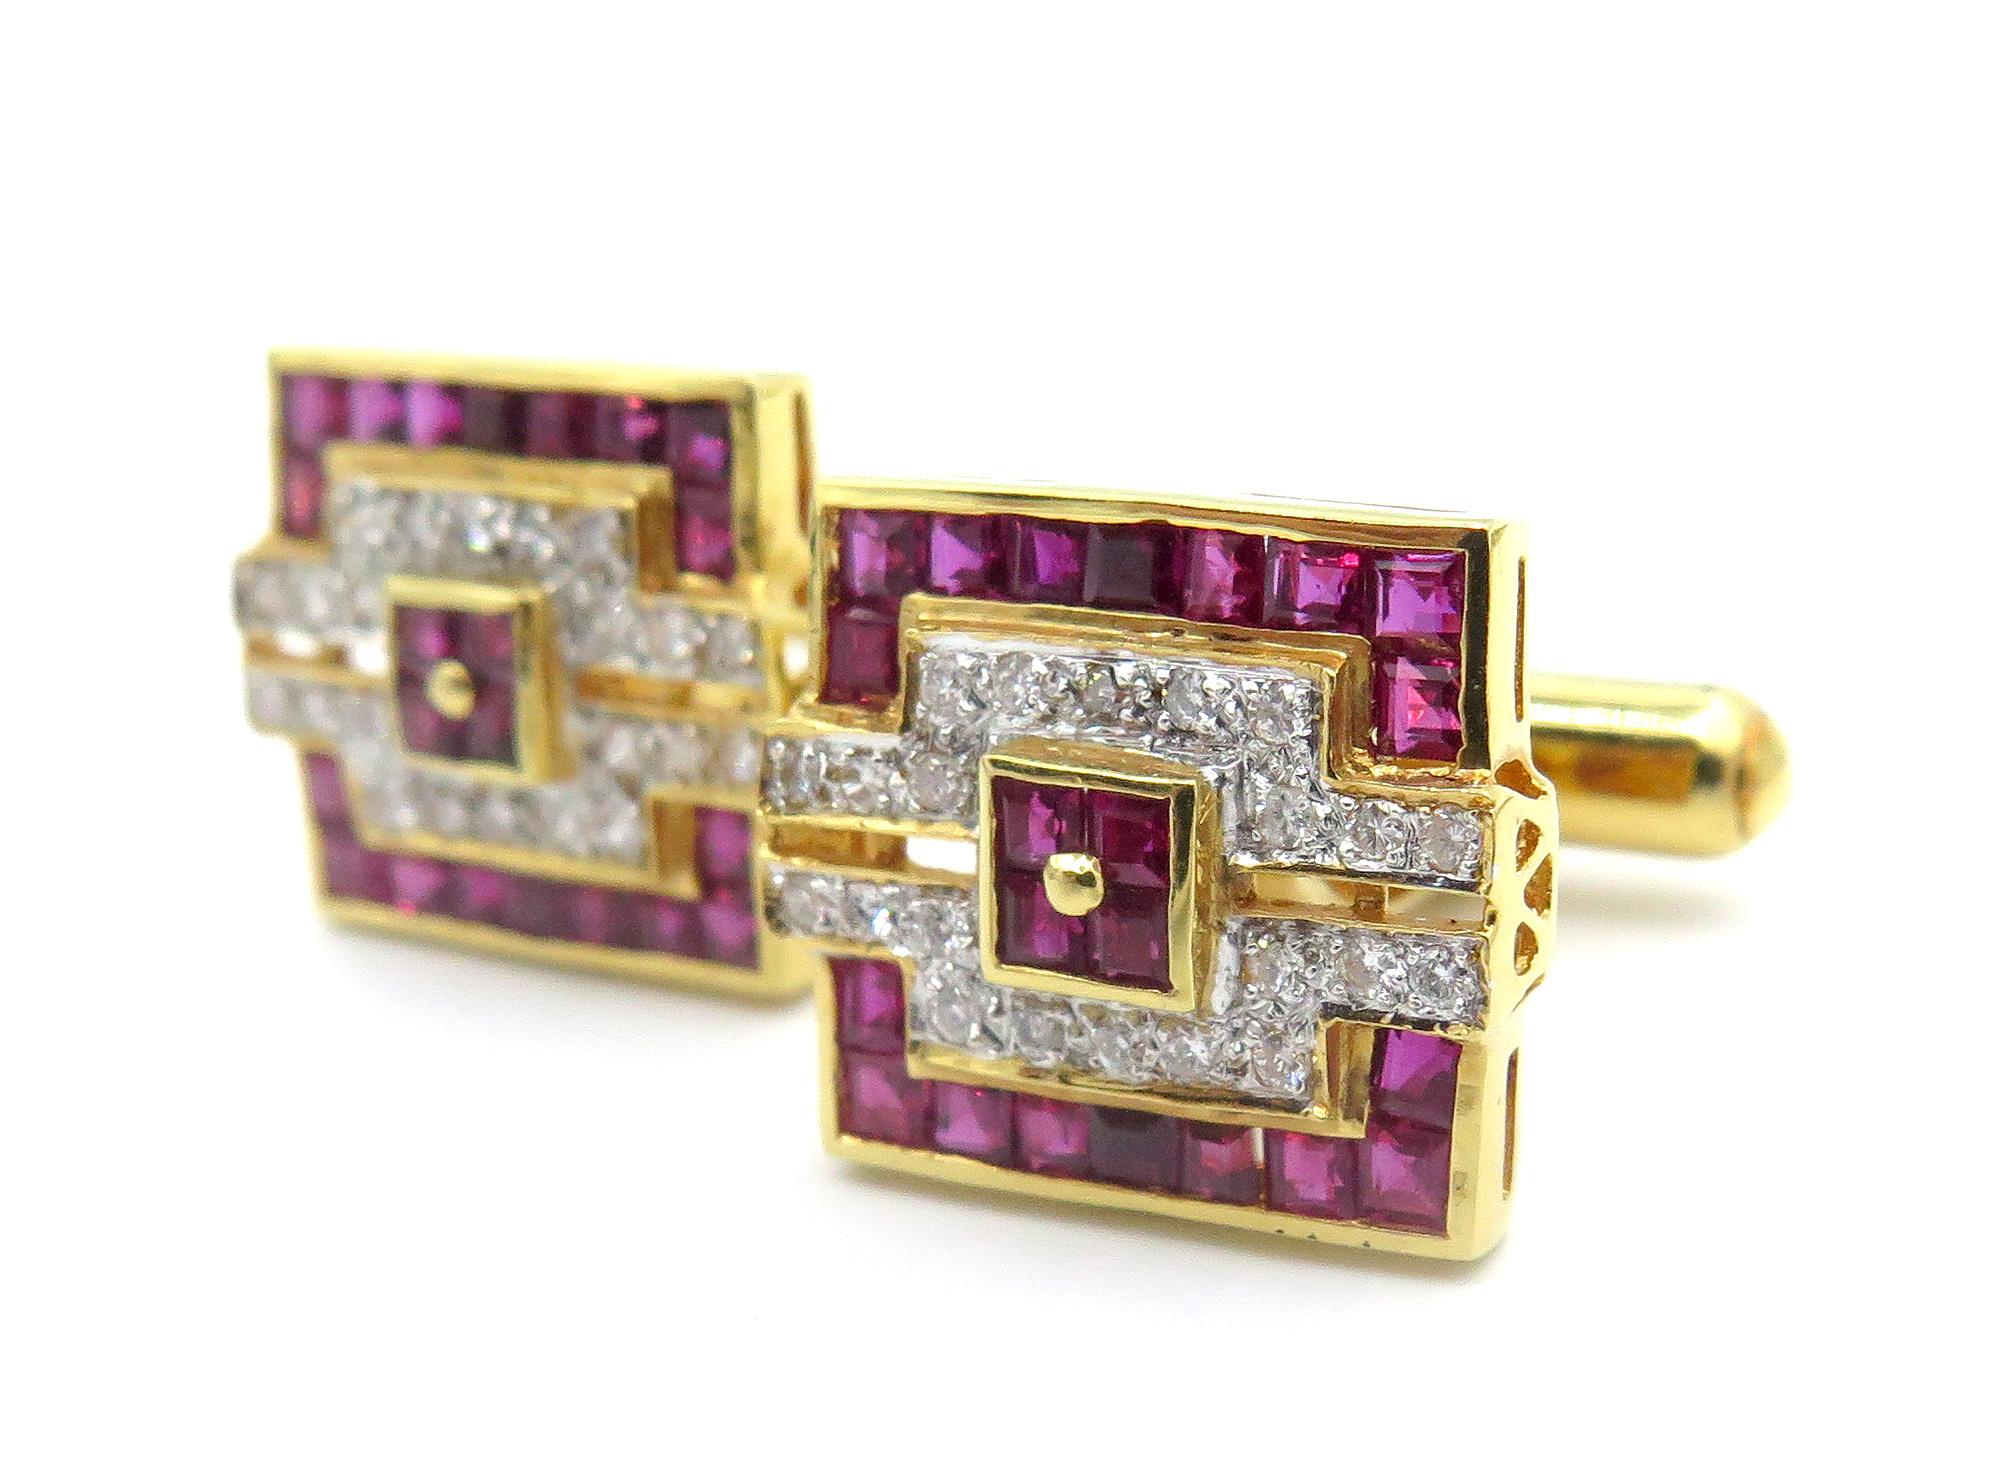 18 Karat Yellow Gold Diamond and Ruby Art Deco Style Cuff Links In Excellent Condition For Sale In West Palm Beach, FL